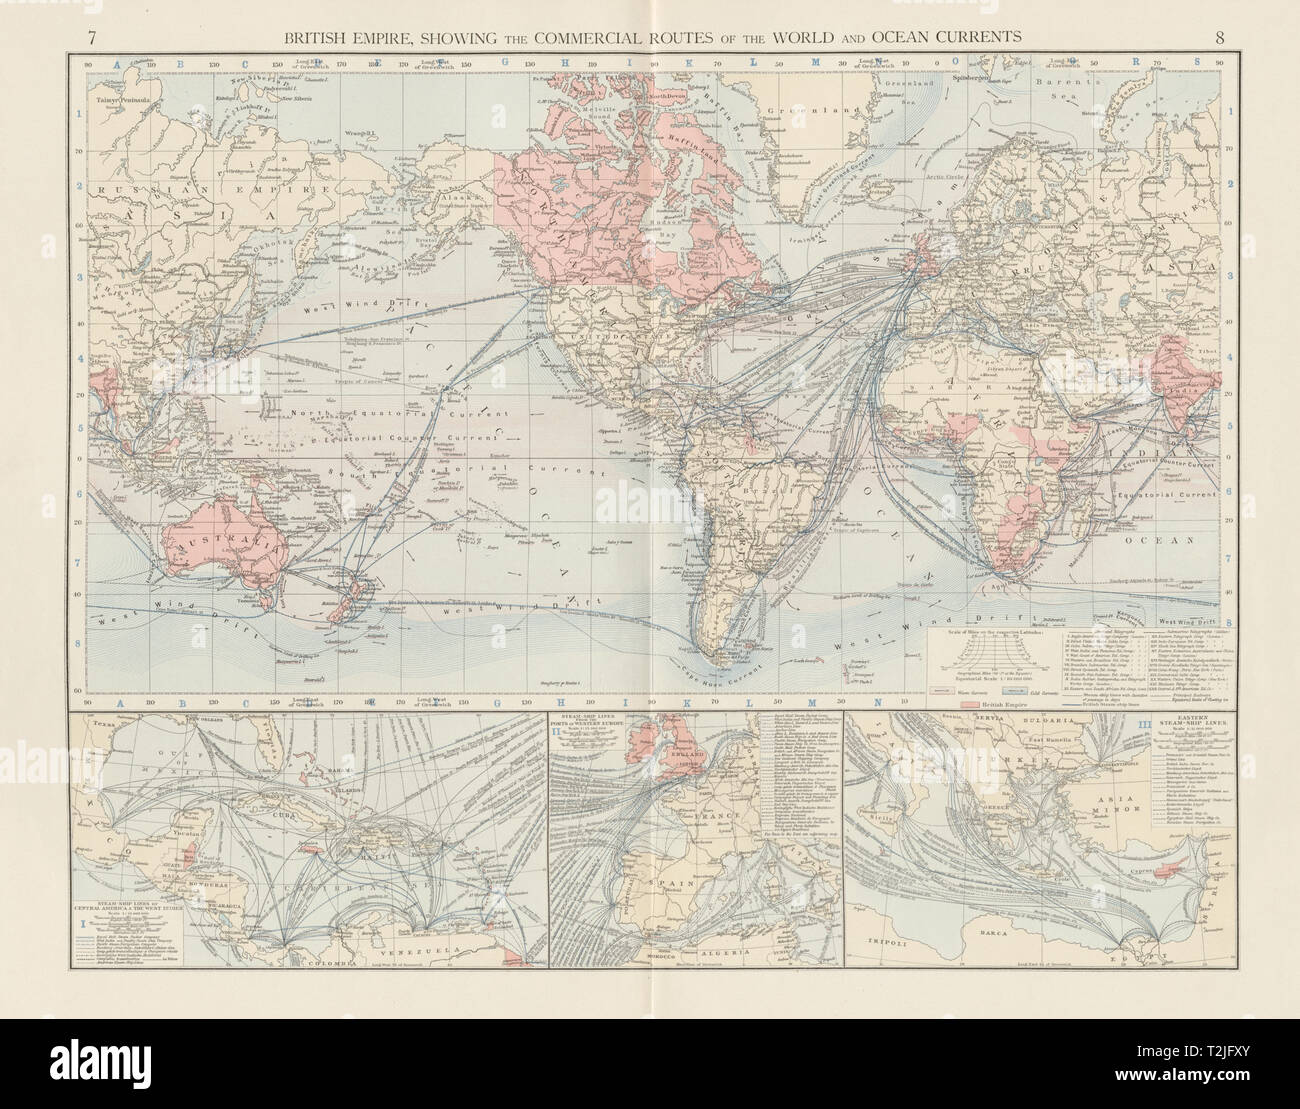 British Empire. Trade routes. Ocean currents. World. THE TIMES 1900 old map  Stock Photo - Alamy